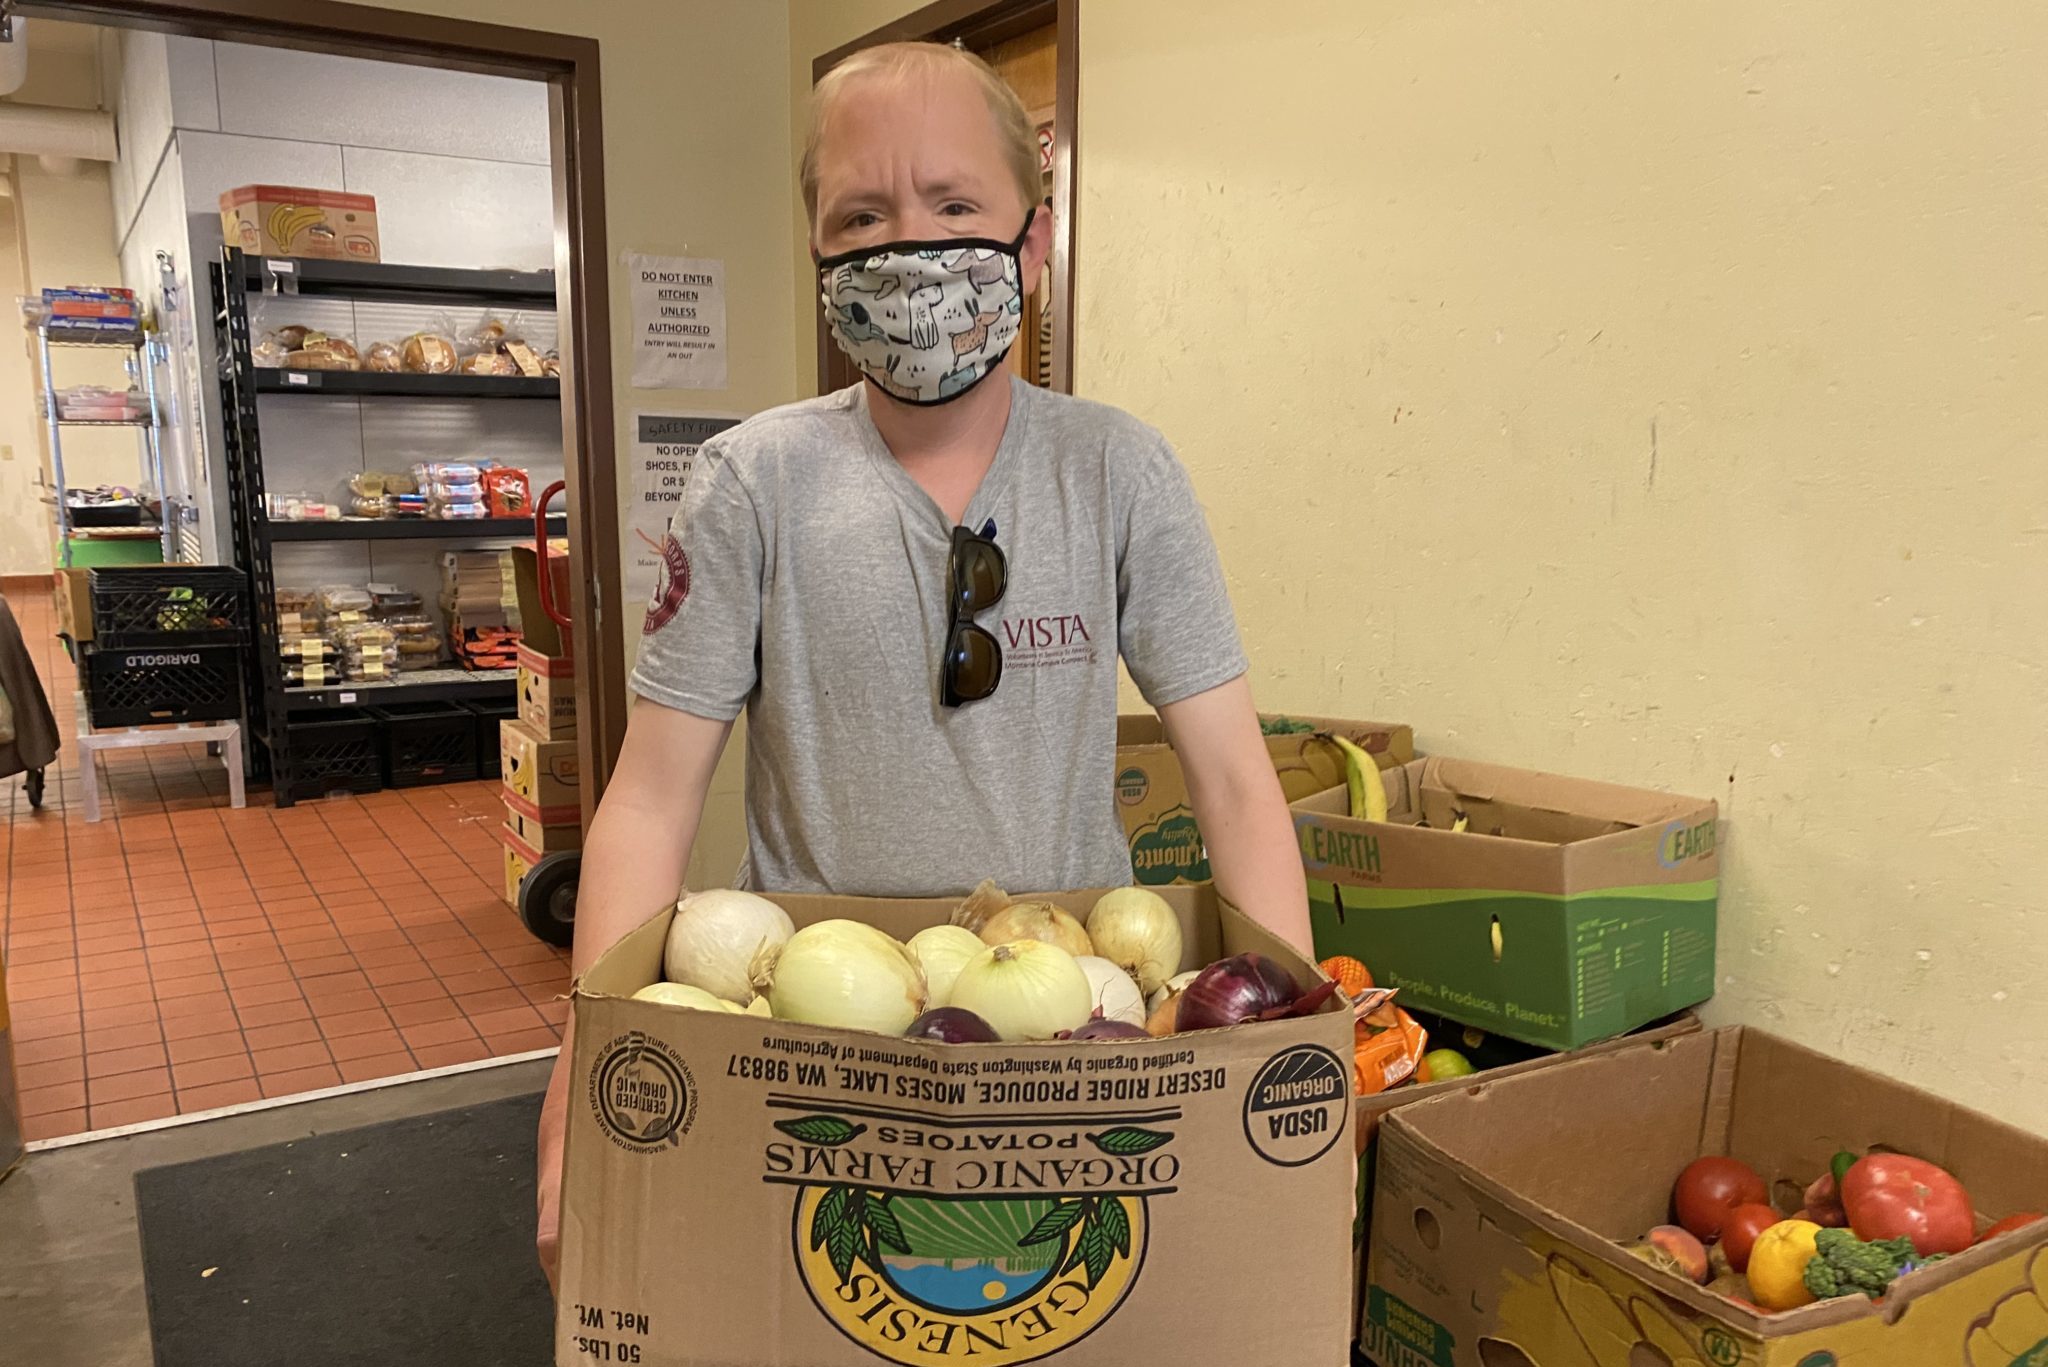 a person holding a box of onions and wearing a VISTA shirt